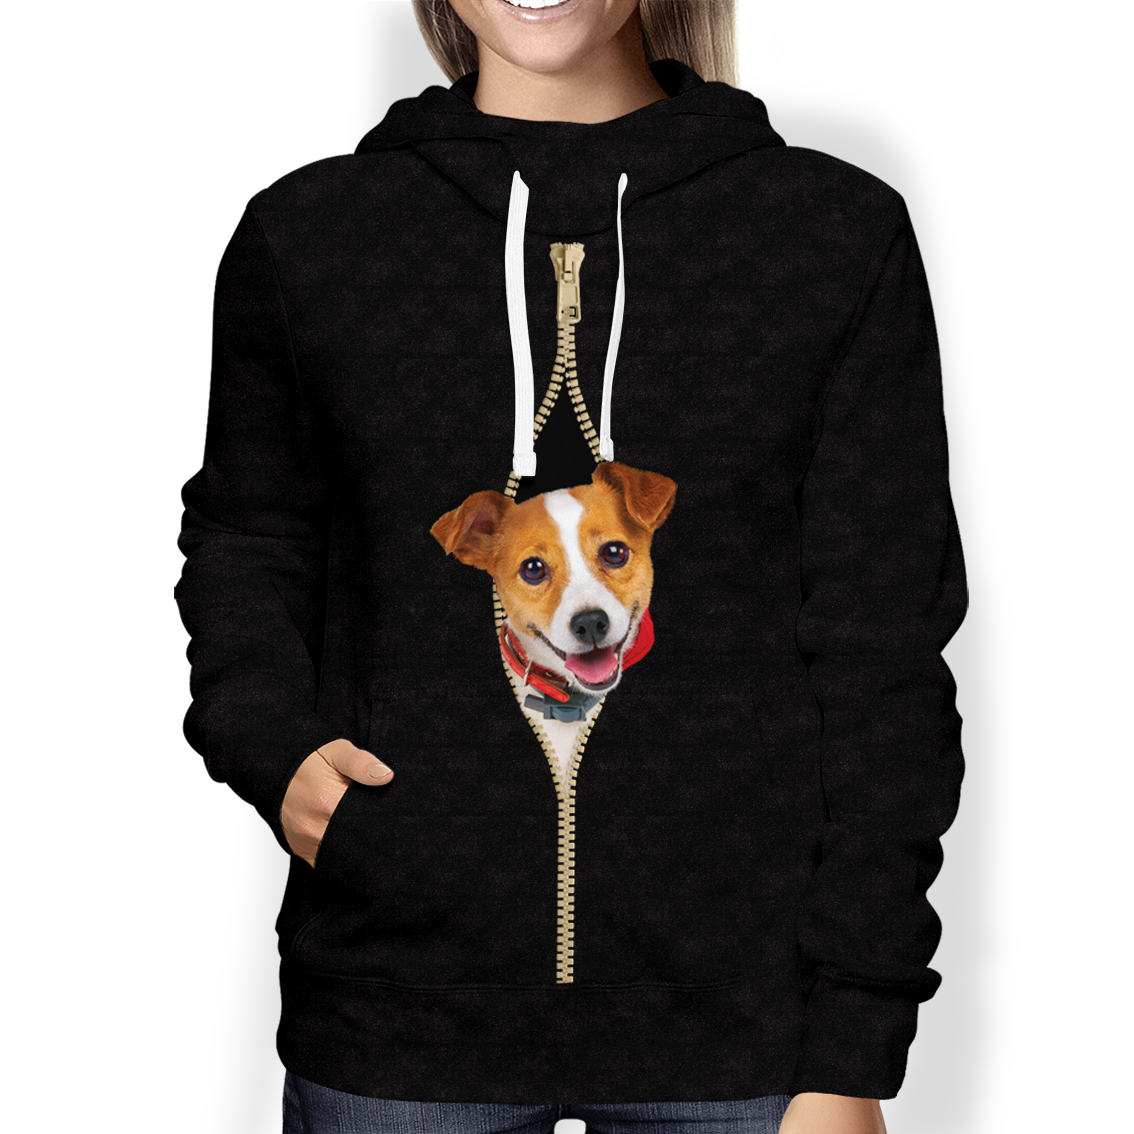 I'm With You - Jack Russell Terrier Hoodie V2